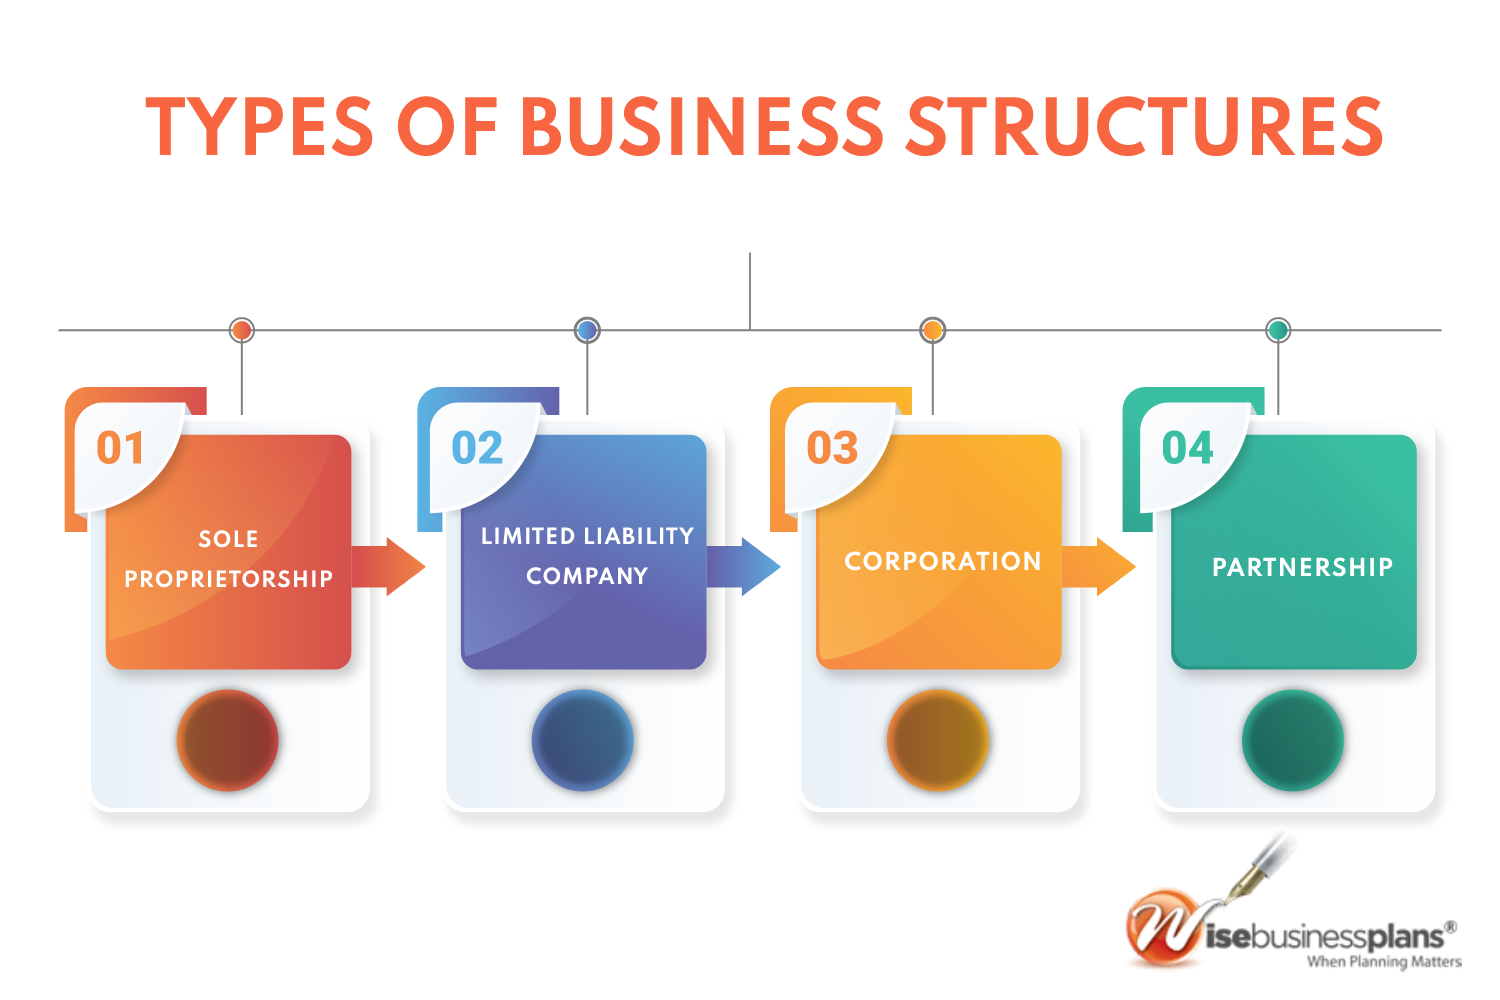 Corporation Business Structure